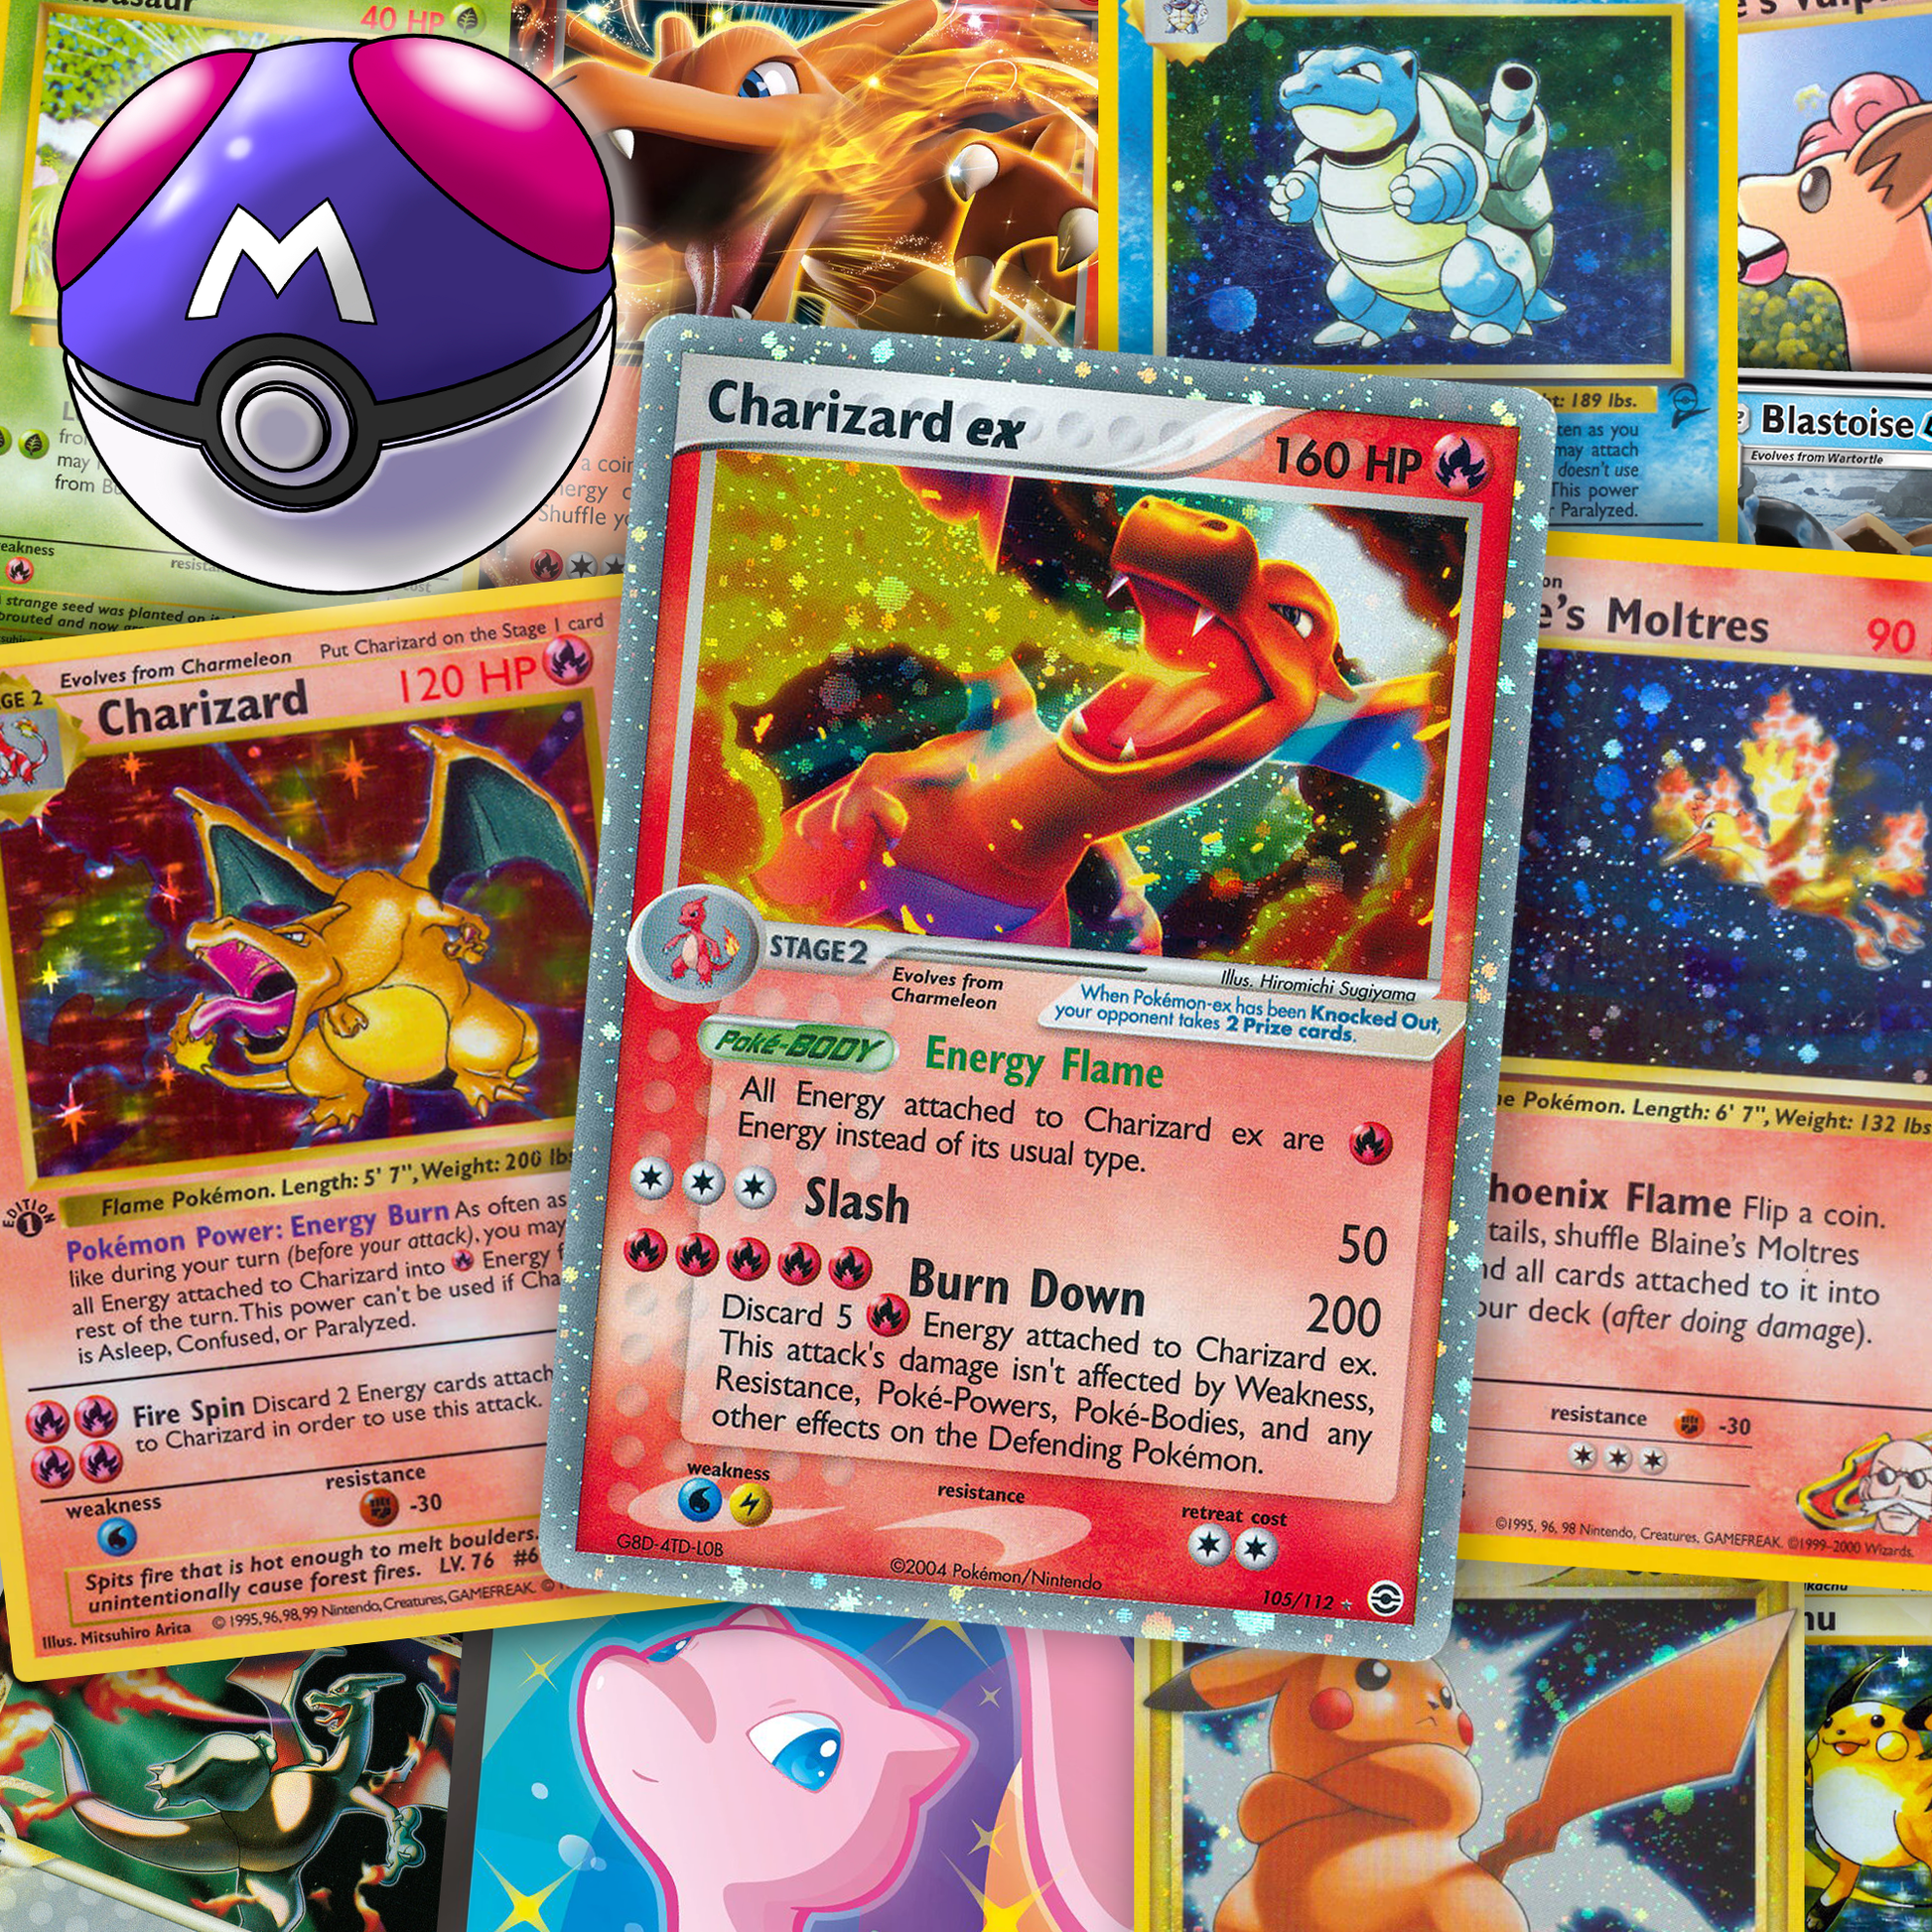 Premier Trading Cards  Pokémon Cards, Collectibles, & Video Games